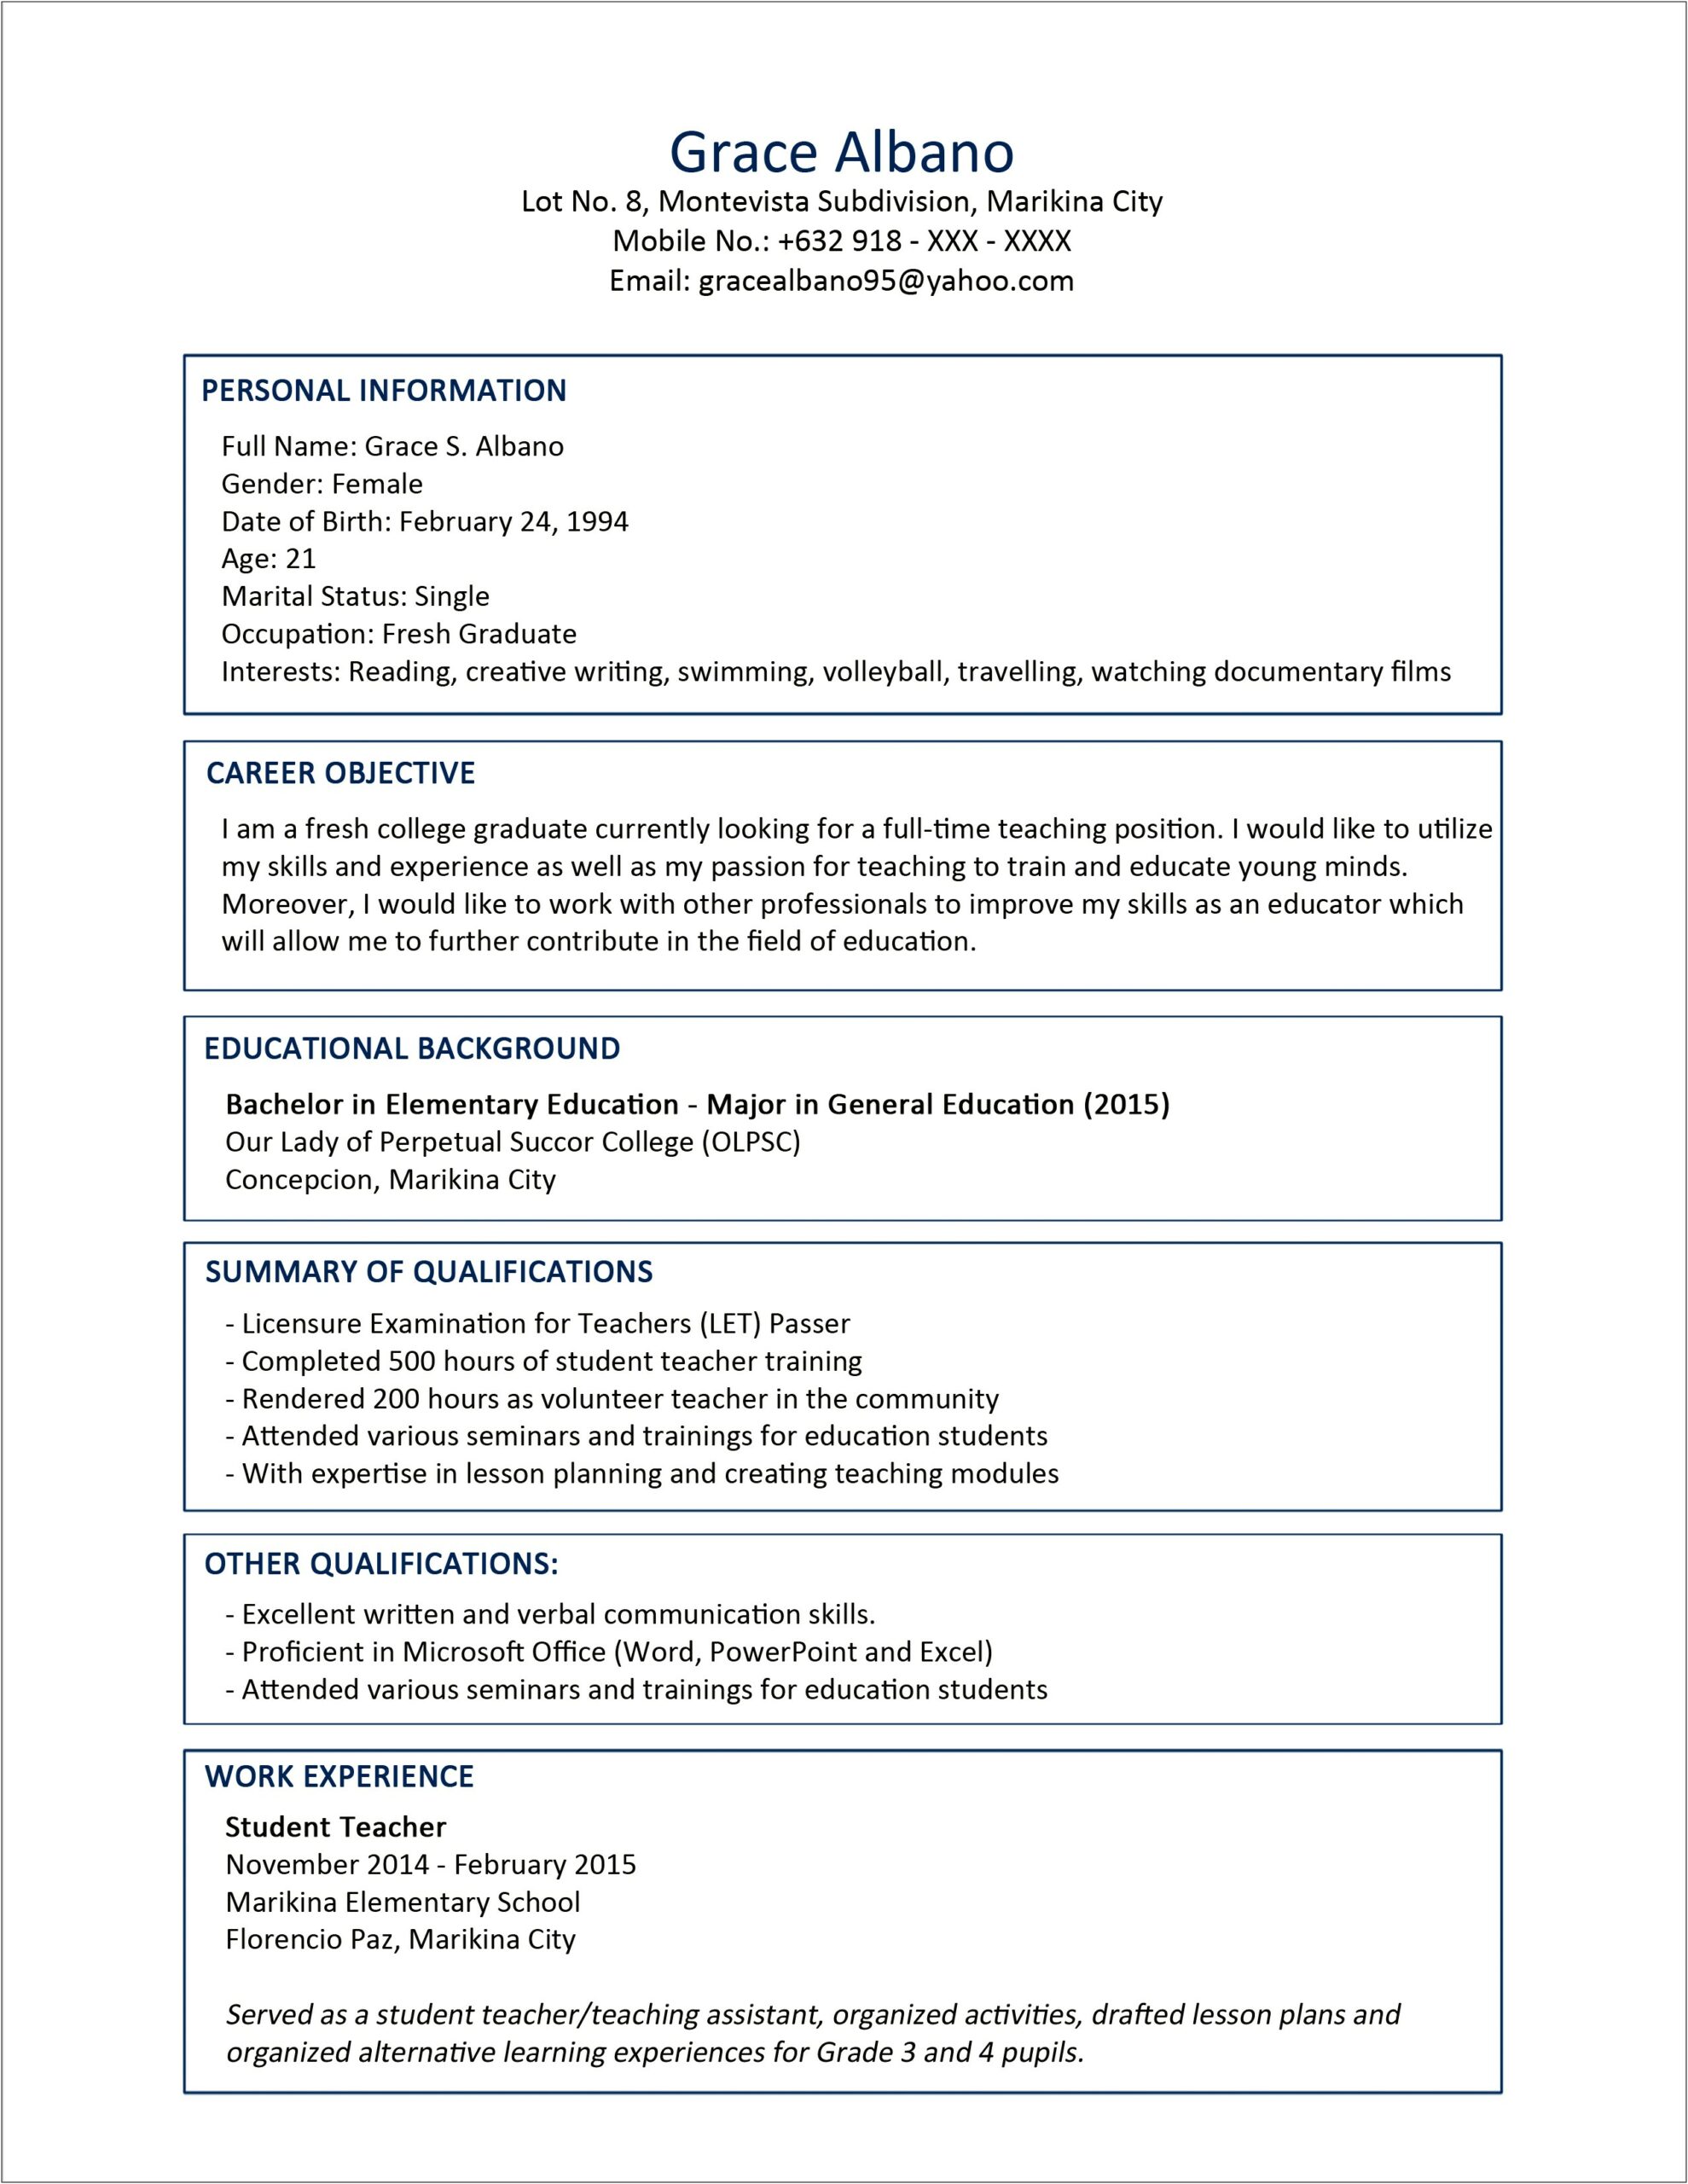 Sample Resume With No References